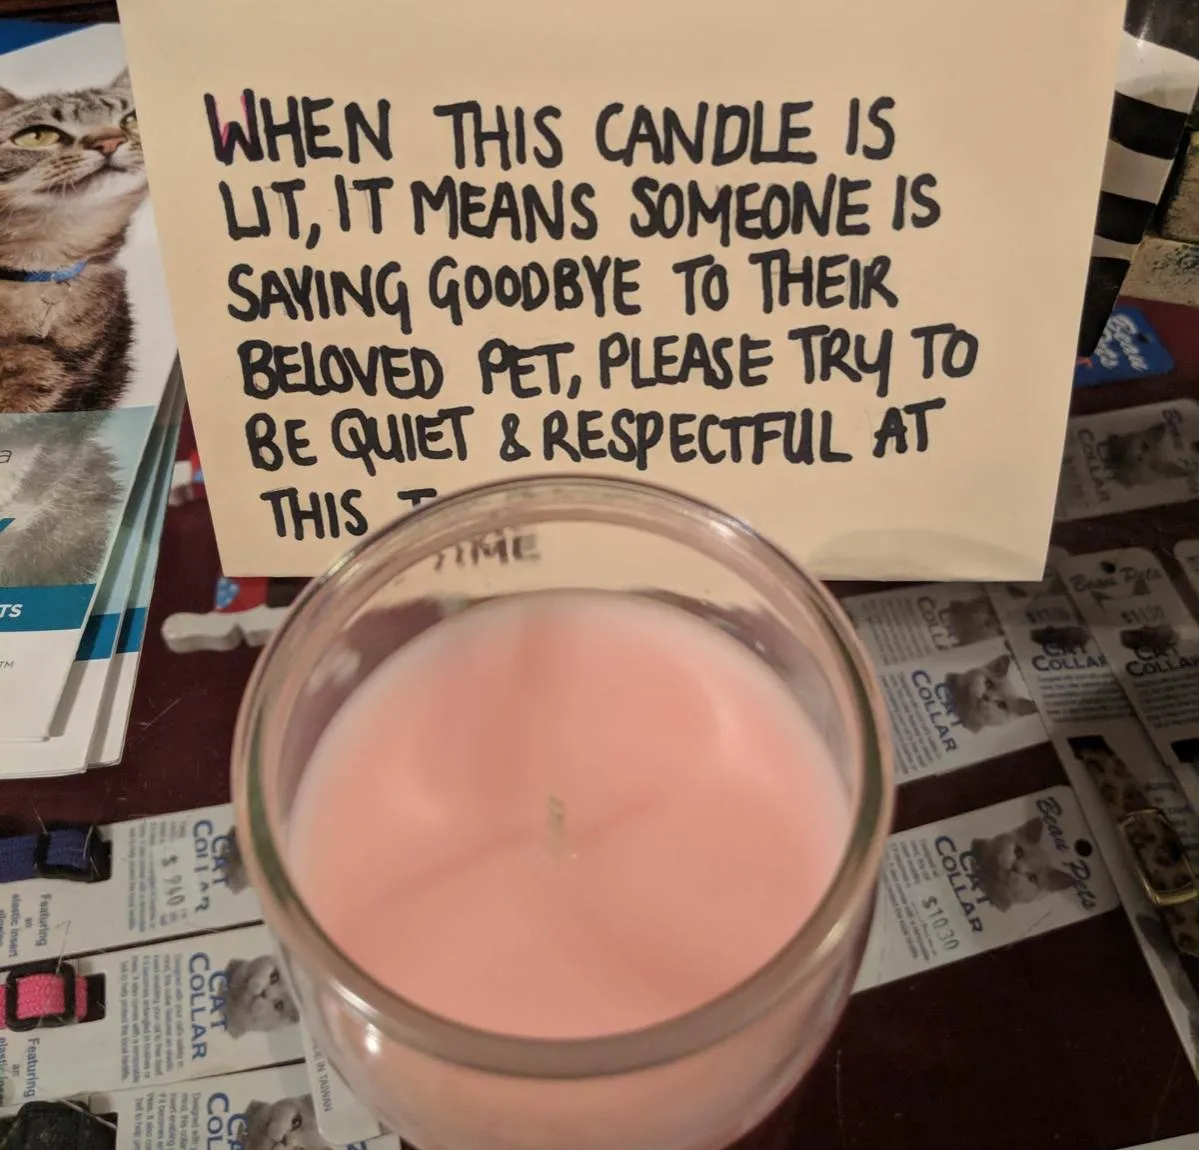 pet candle lit when mourning